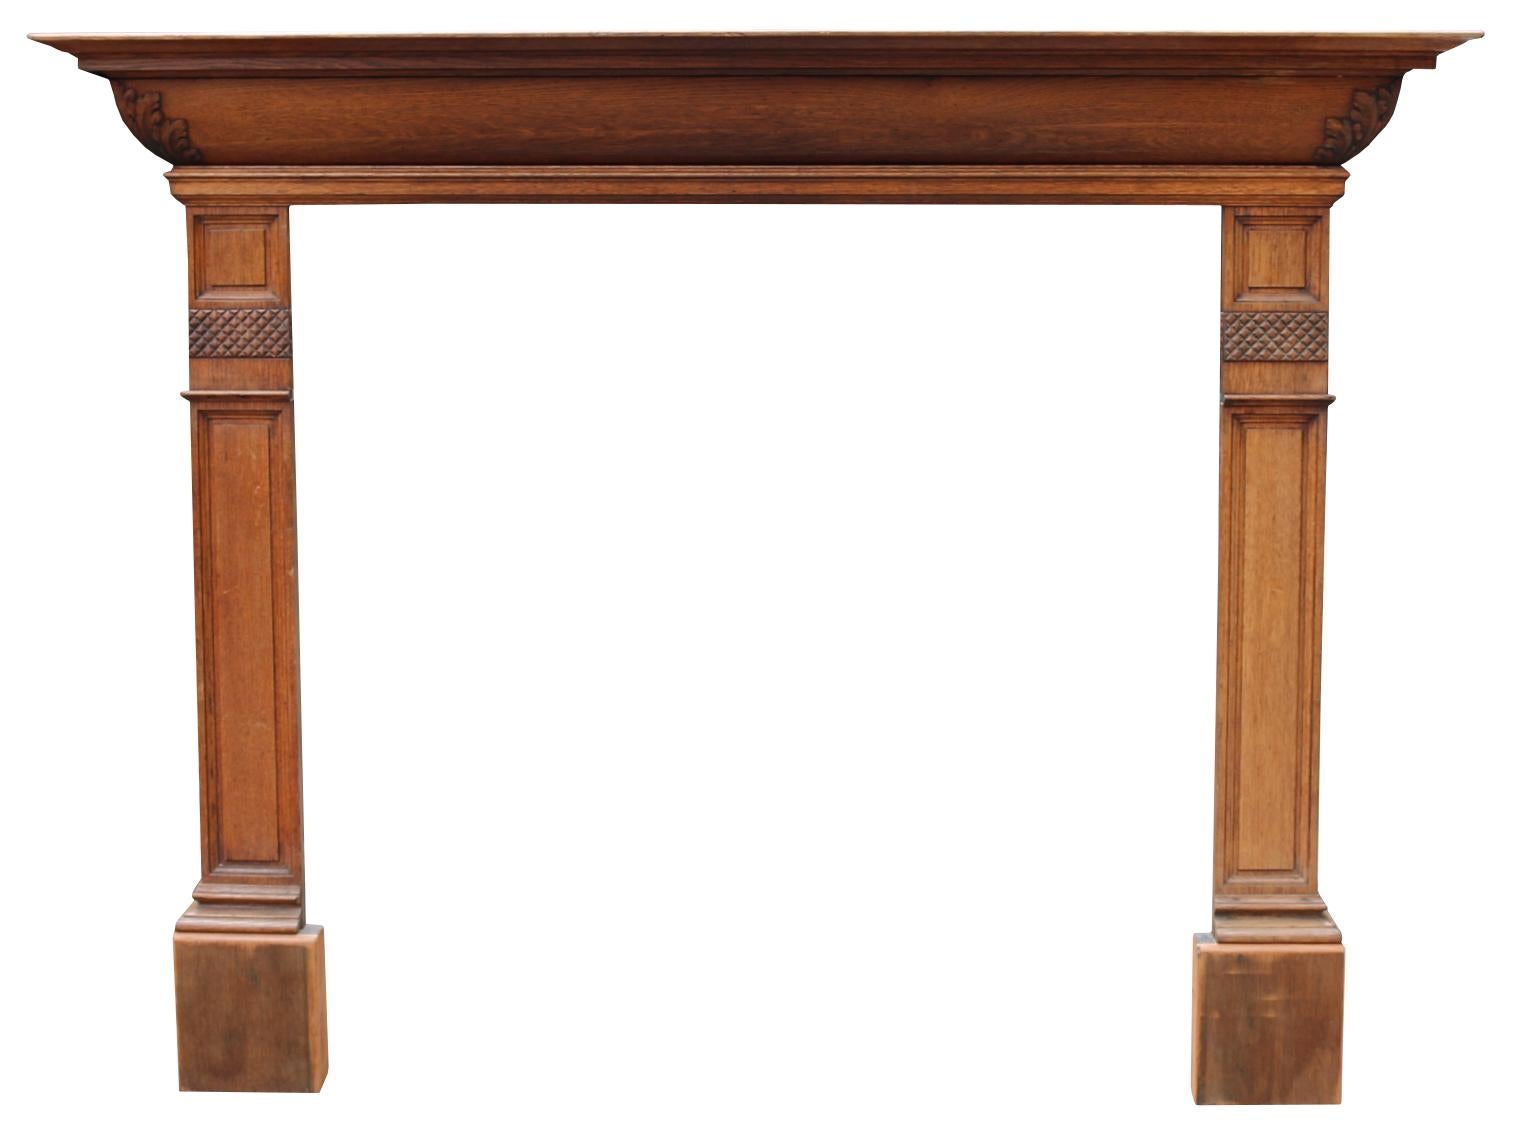 An elegant Victorian surround with barrel frieze and panelled jambs.

Opening Height 120 cm

Opening Width 122 cm.